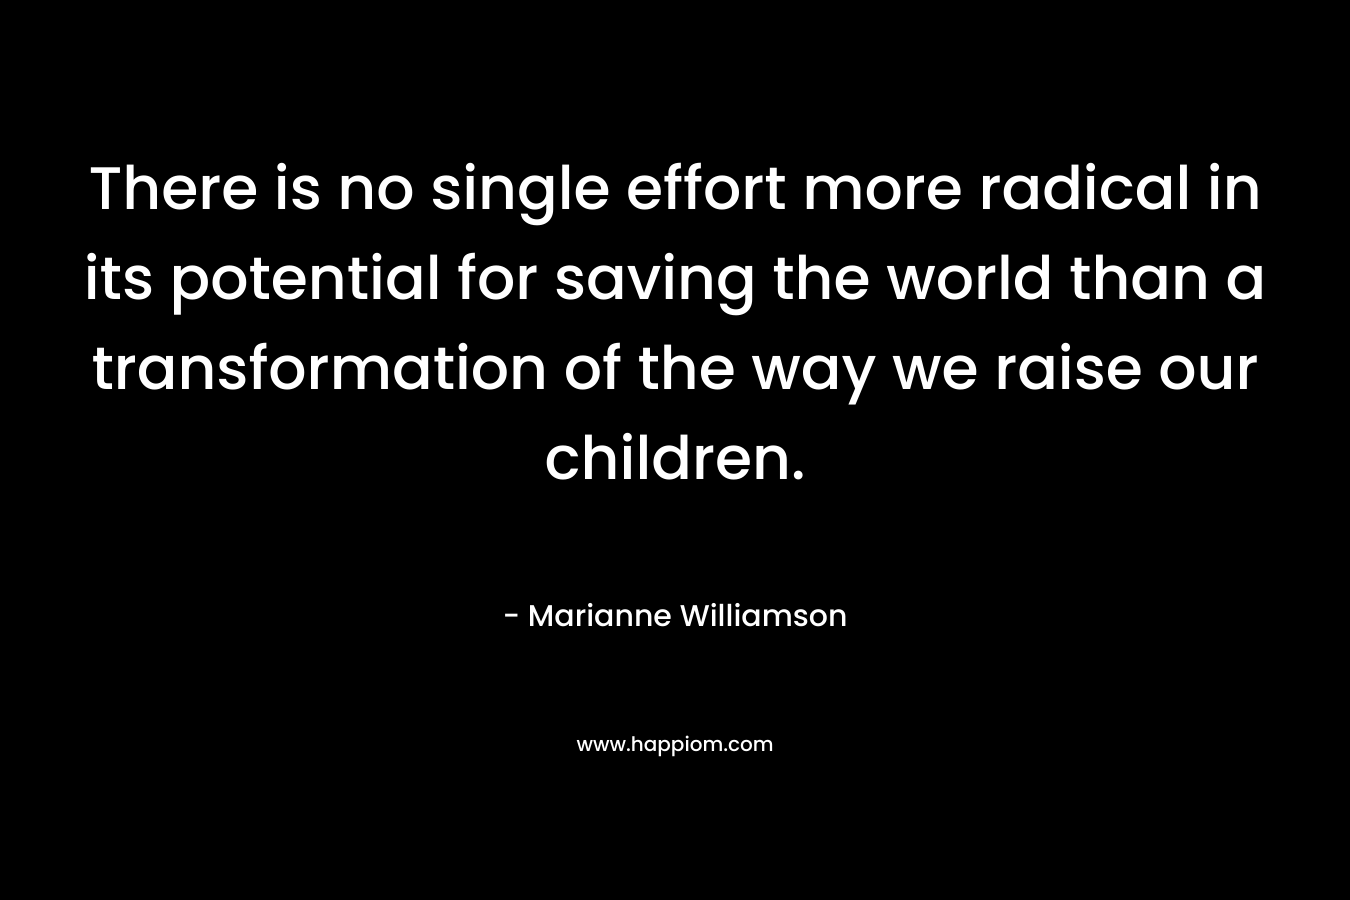 There is no single effort more radical in its potential for saving the world than a transformation of the way we raise our children.